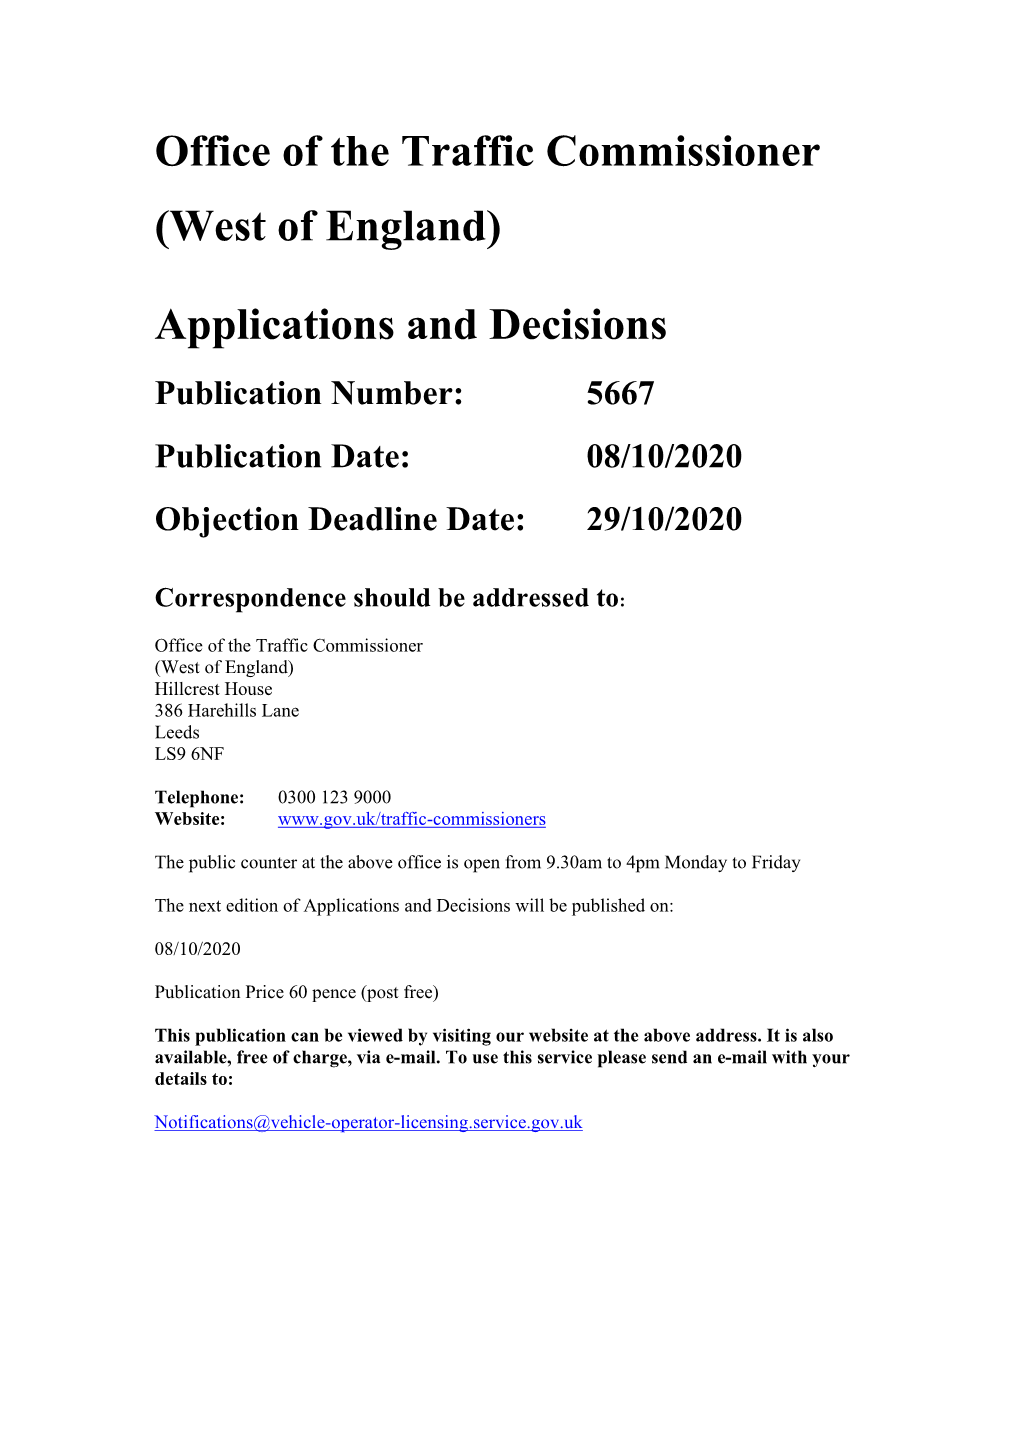 Applications and Decisions for the West of England 5667